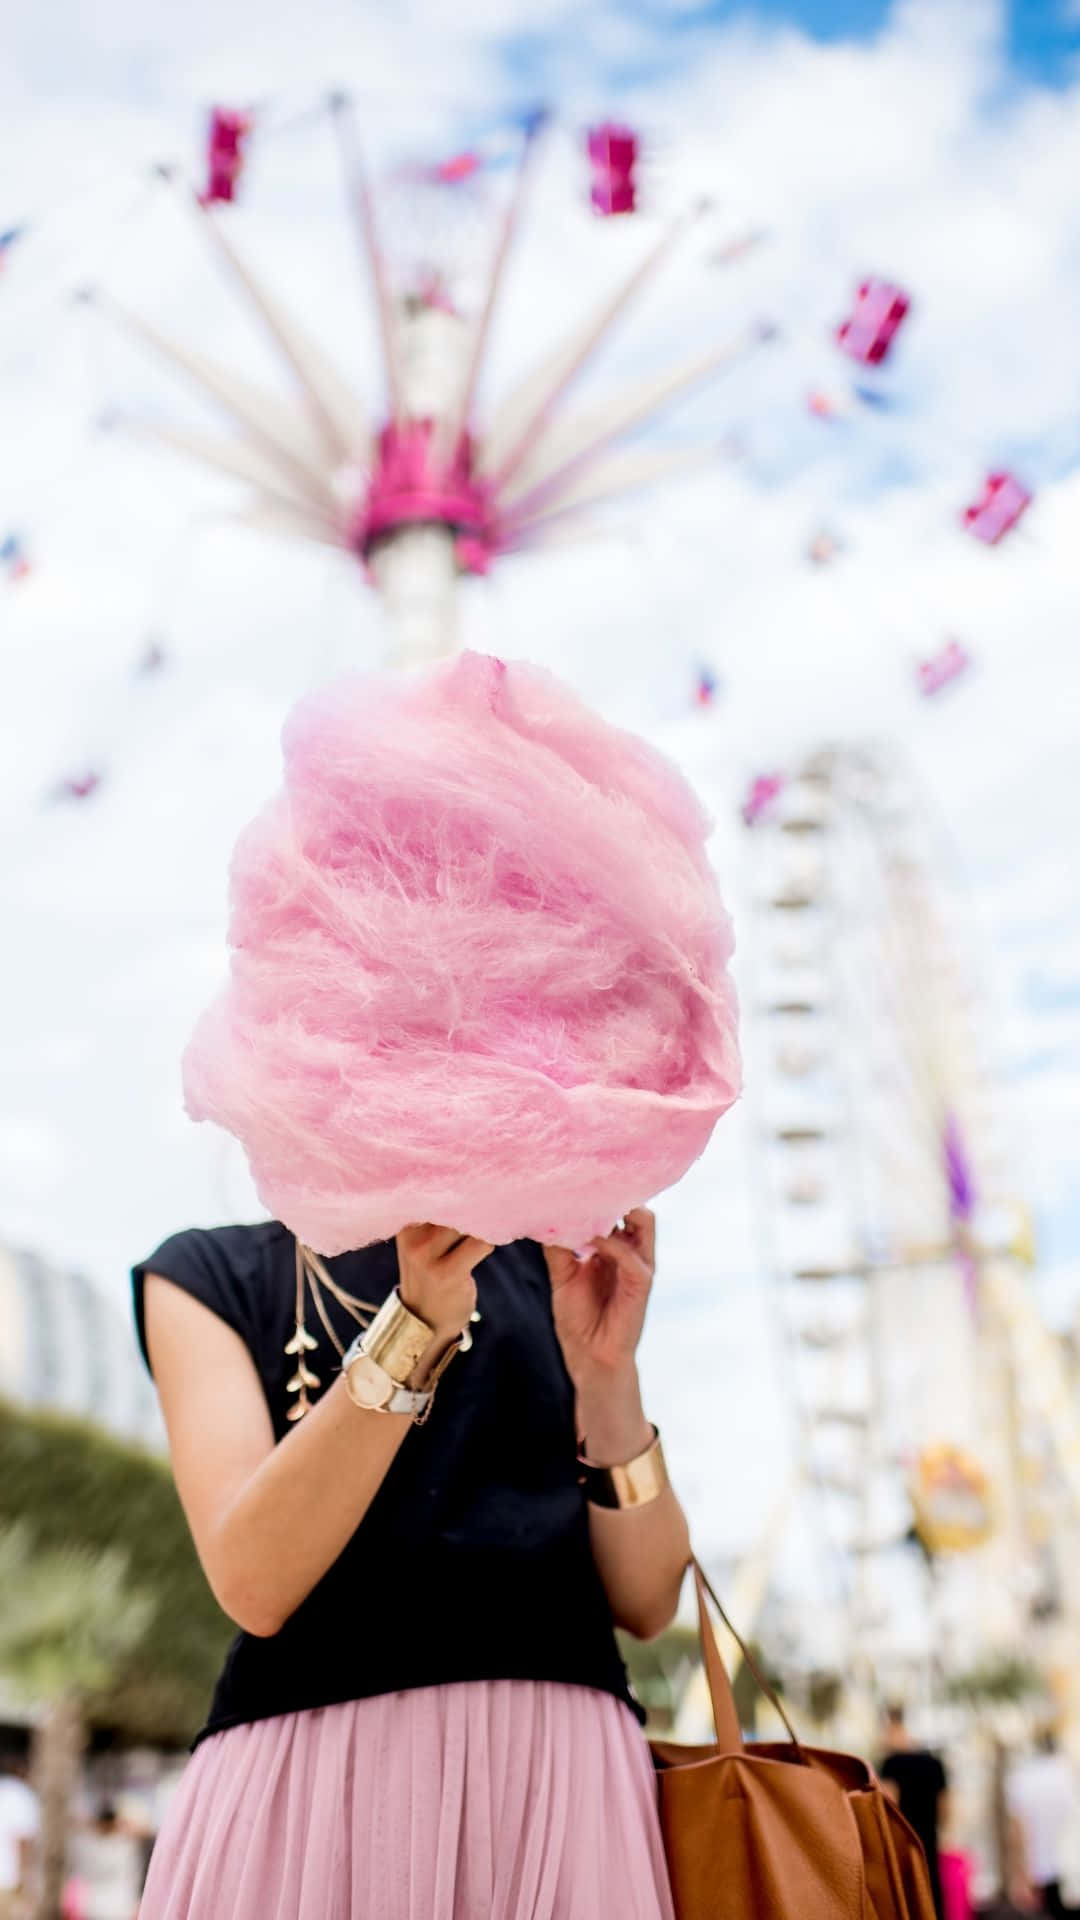 Delicious and Fluffy Cotton Candy on a Stick Wallpaper